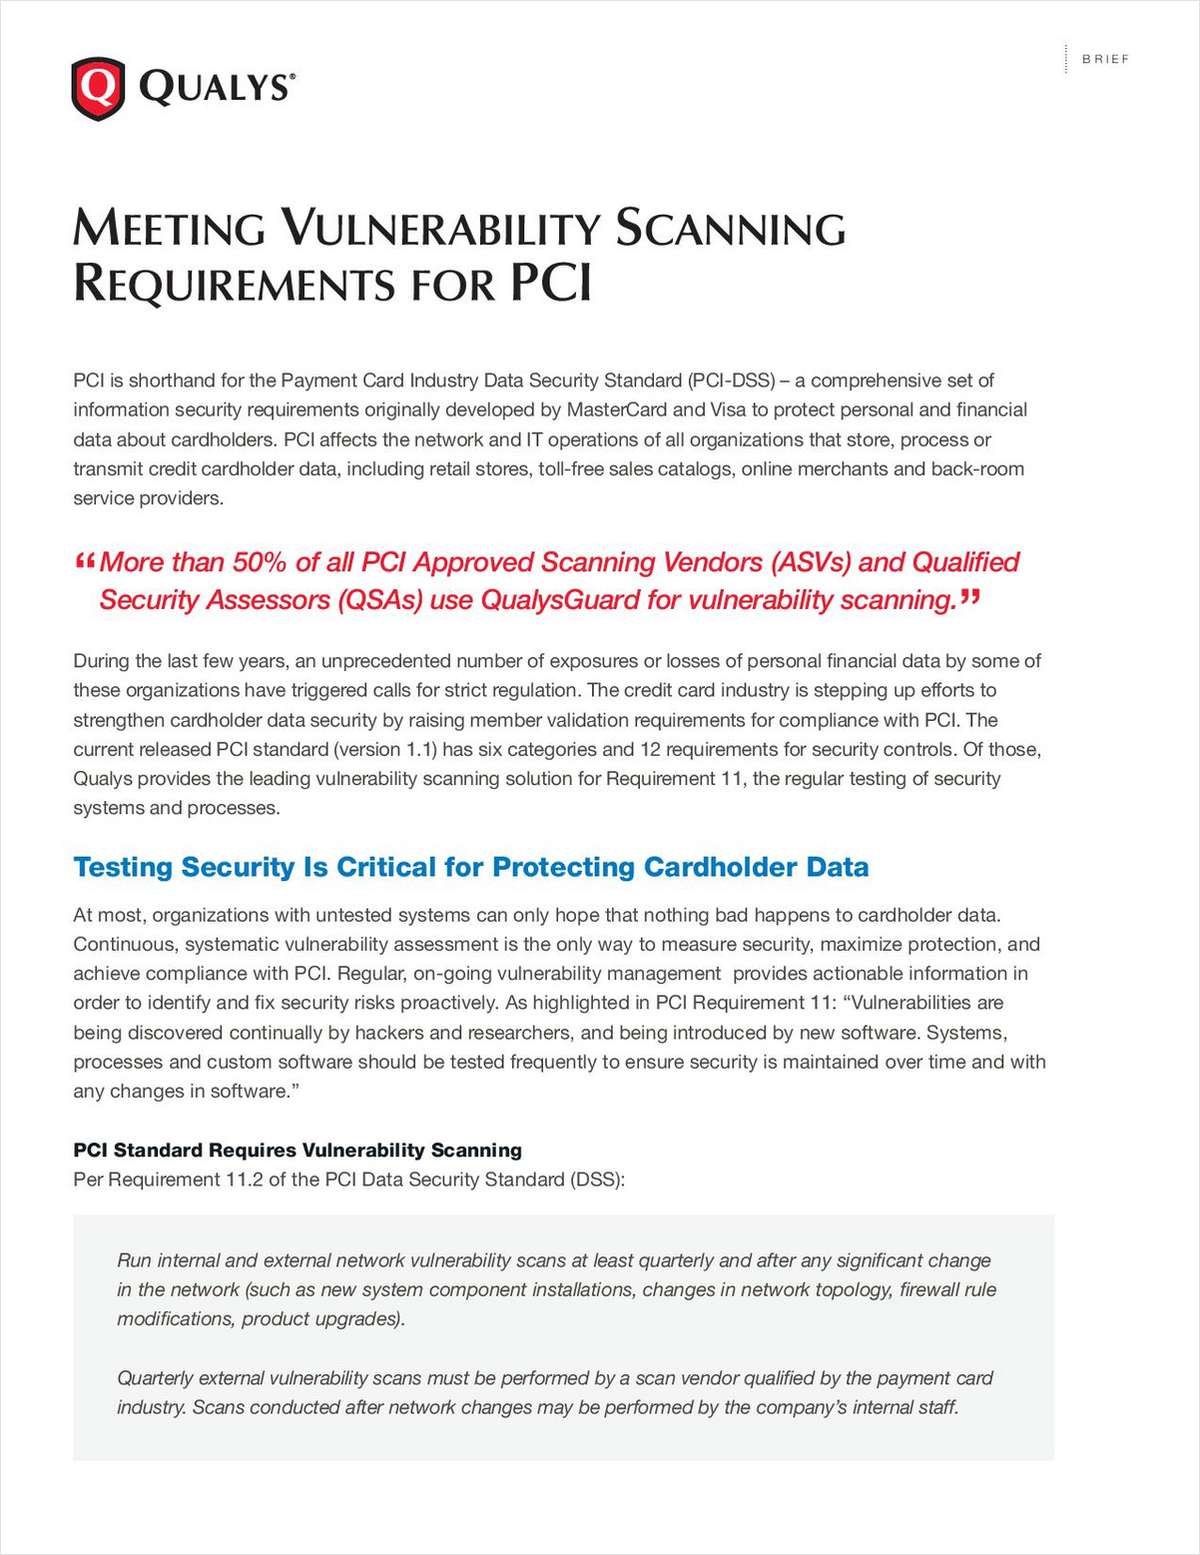 Meeting Vulnerability Scanning Requirements for PCI